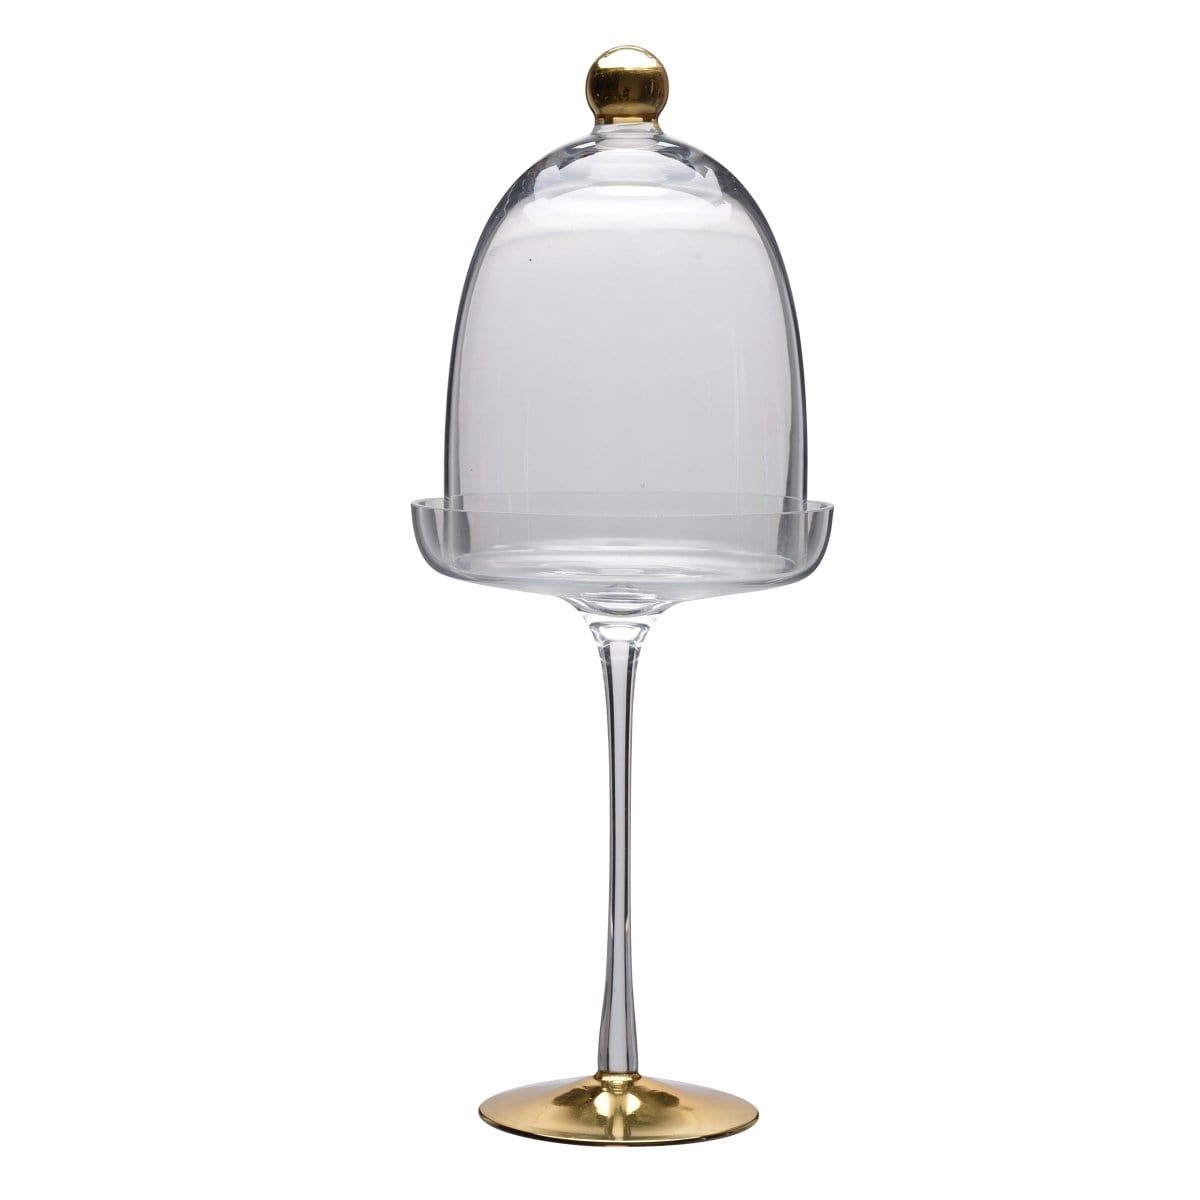 AB-75974 Maely Pedestal Dome, Tall picket and rail